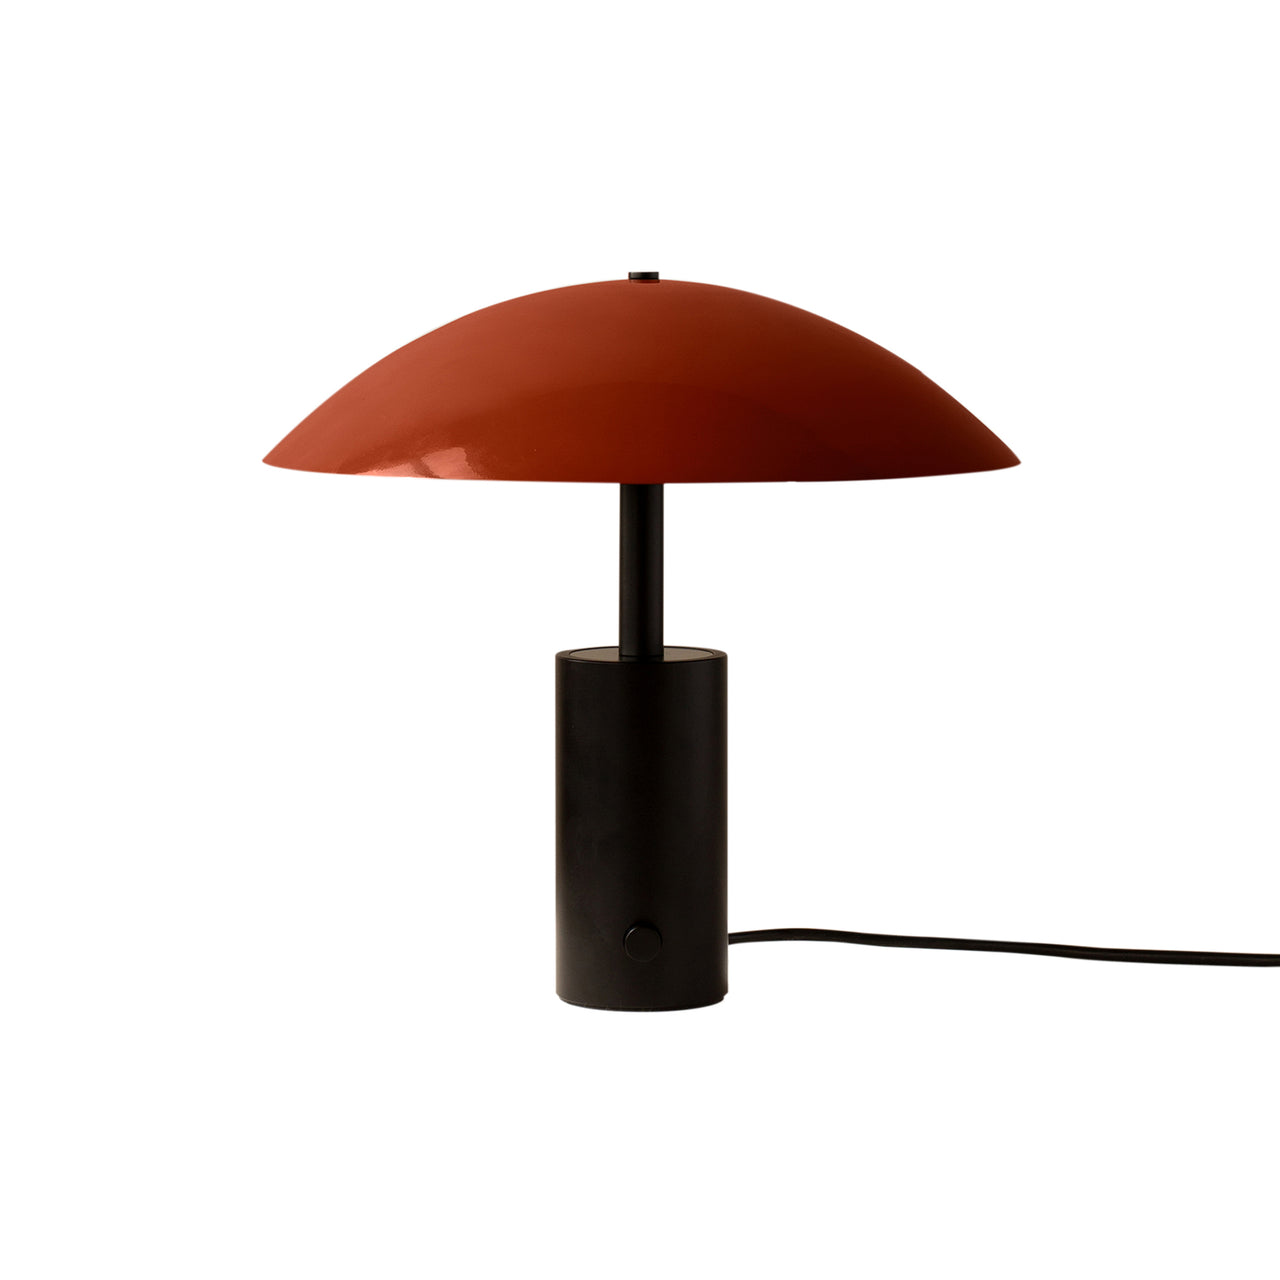 Arundel Low Table Lamp: Oxide Red